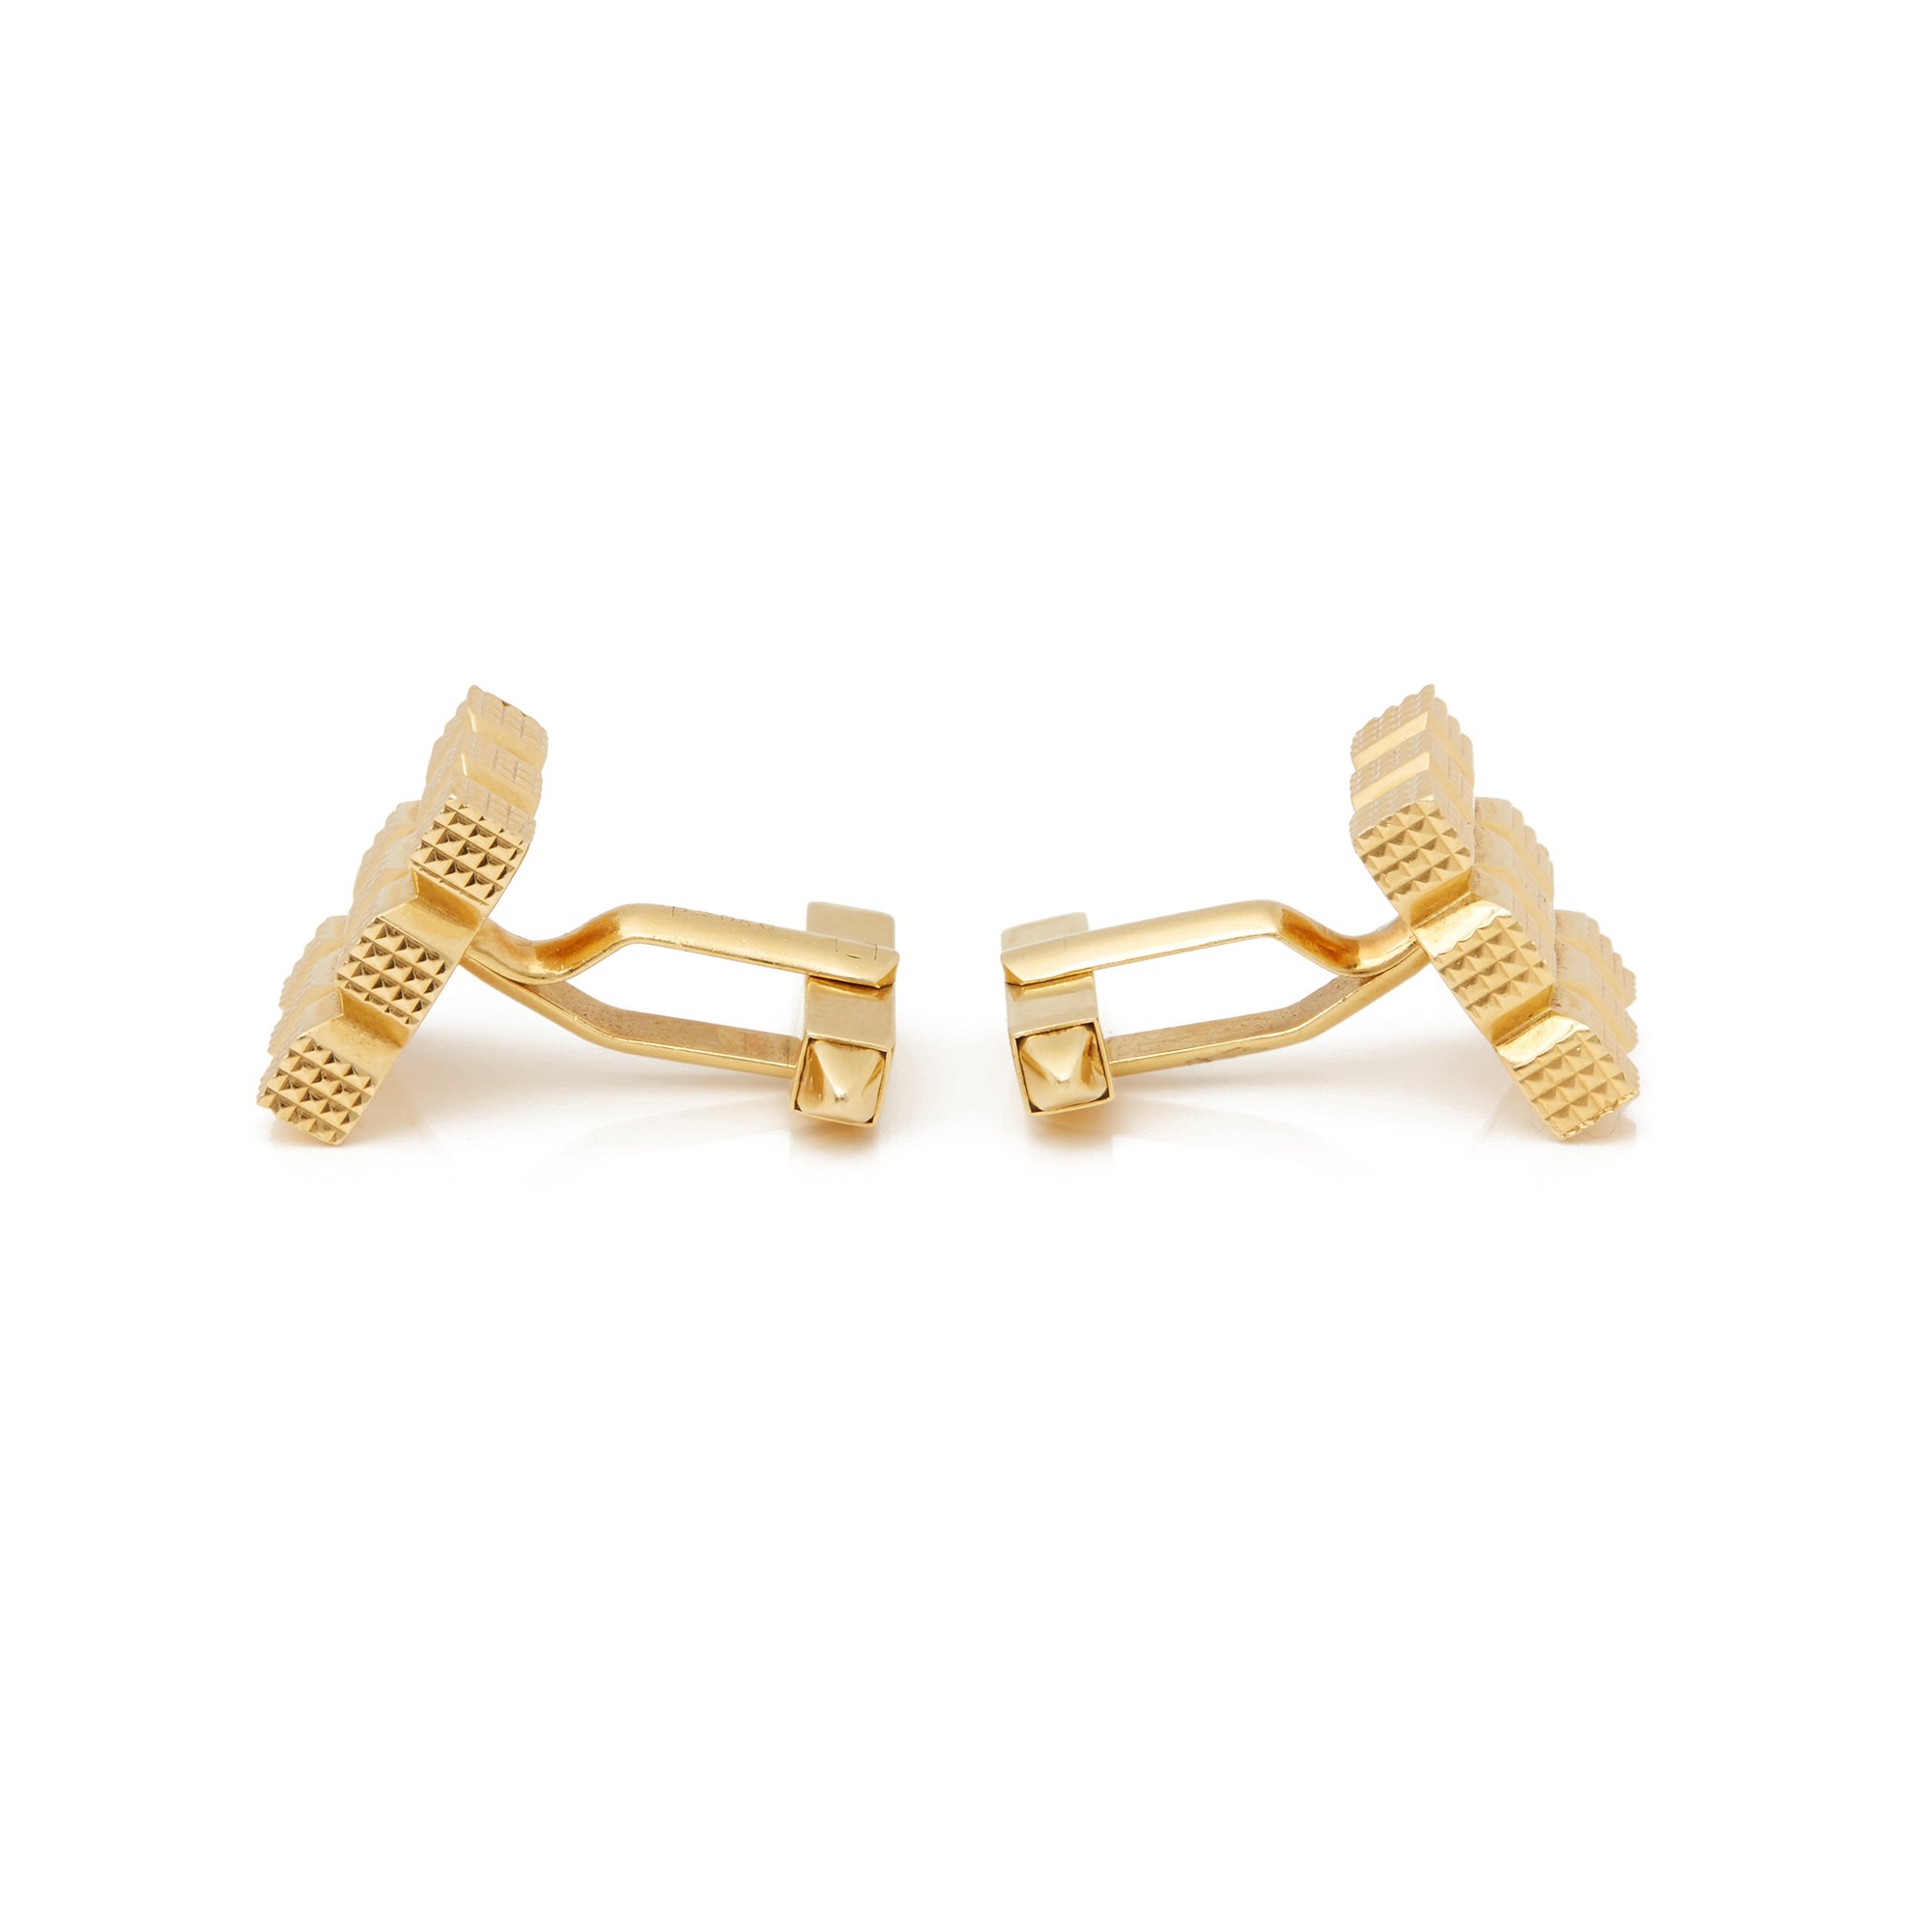 Kutchinsky 18k Yellow Gold Vintage Square Grooved Cufflinks